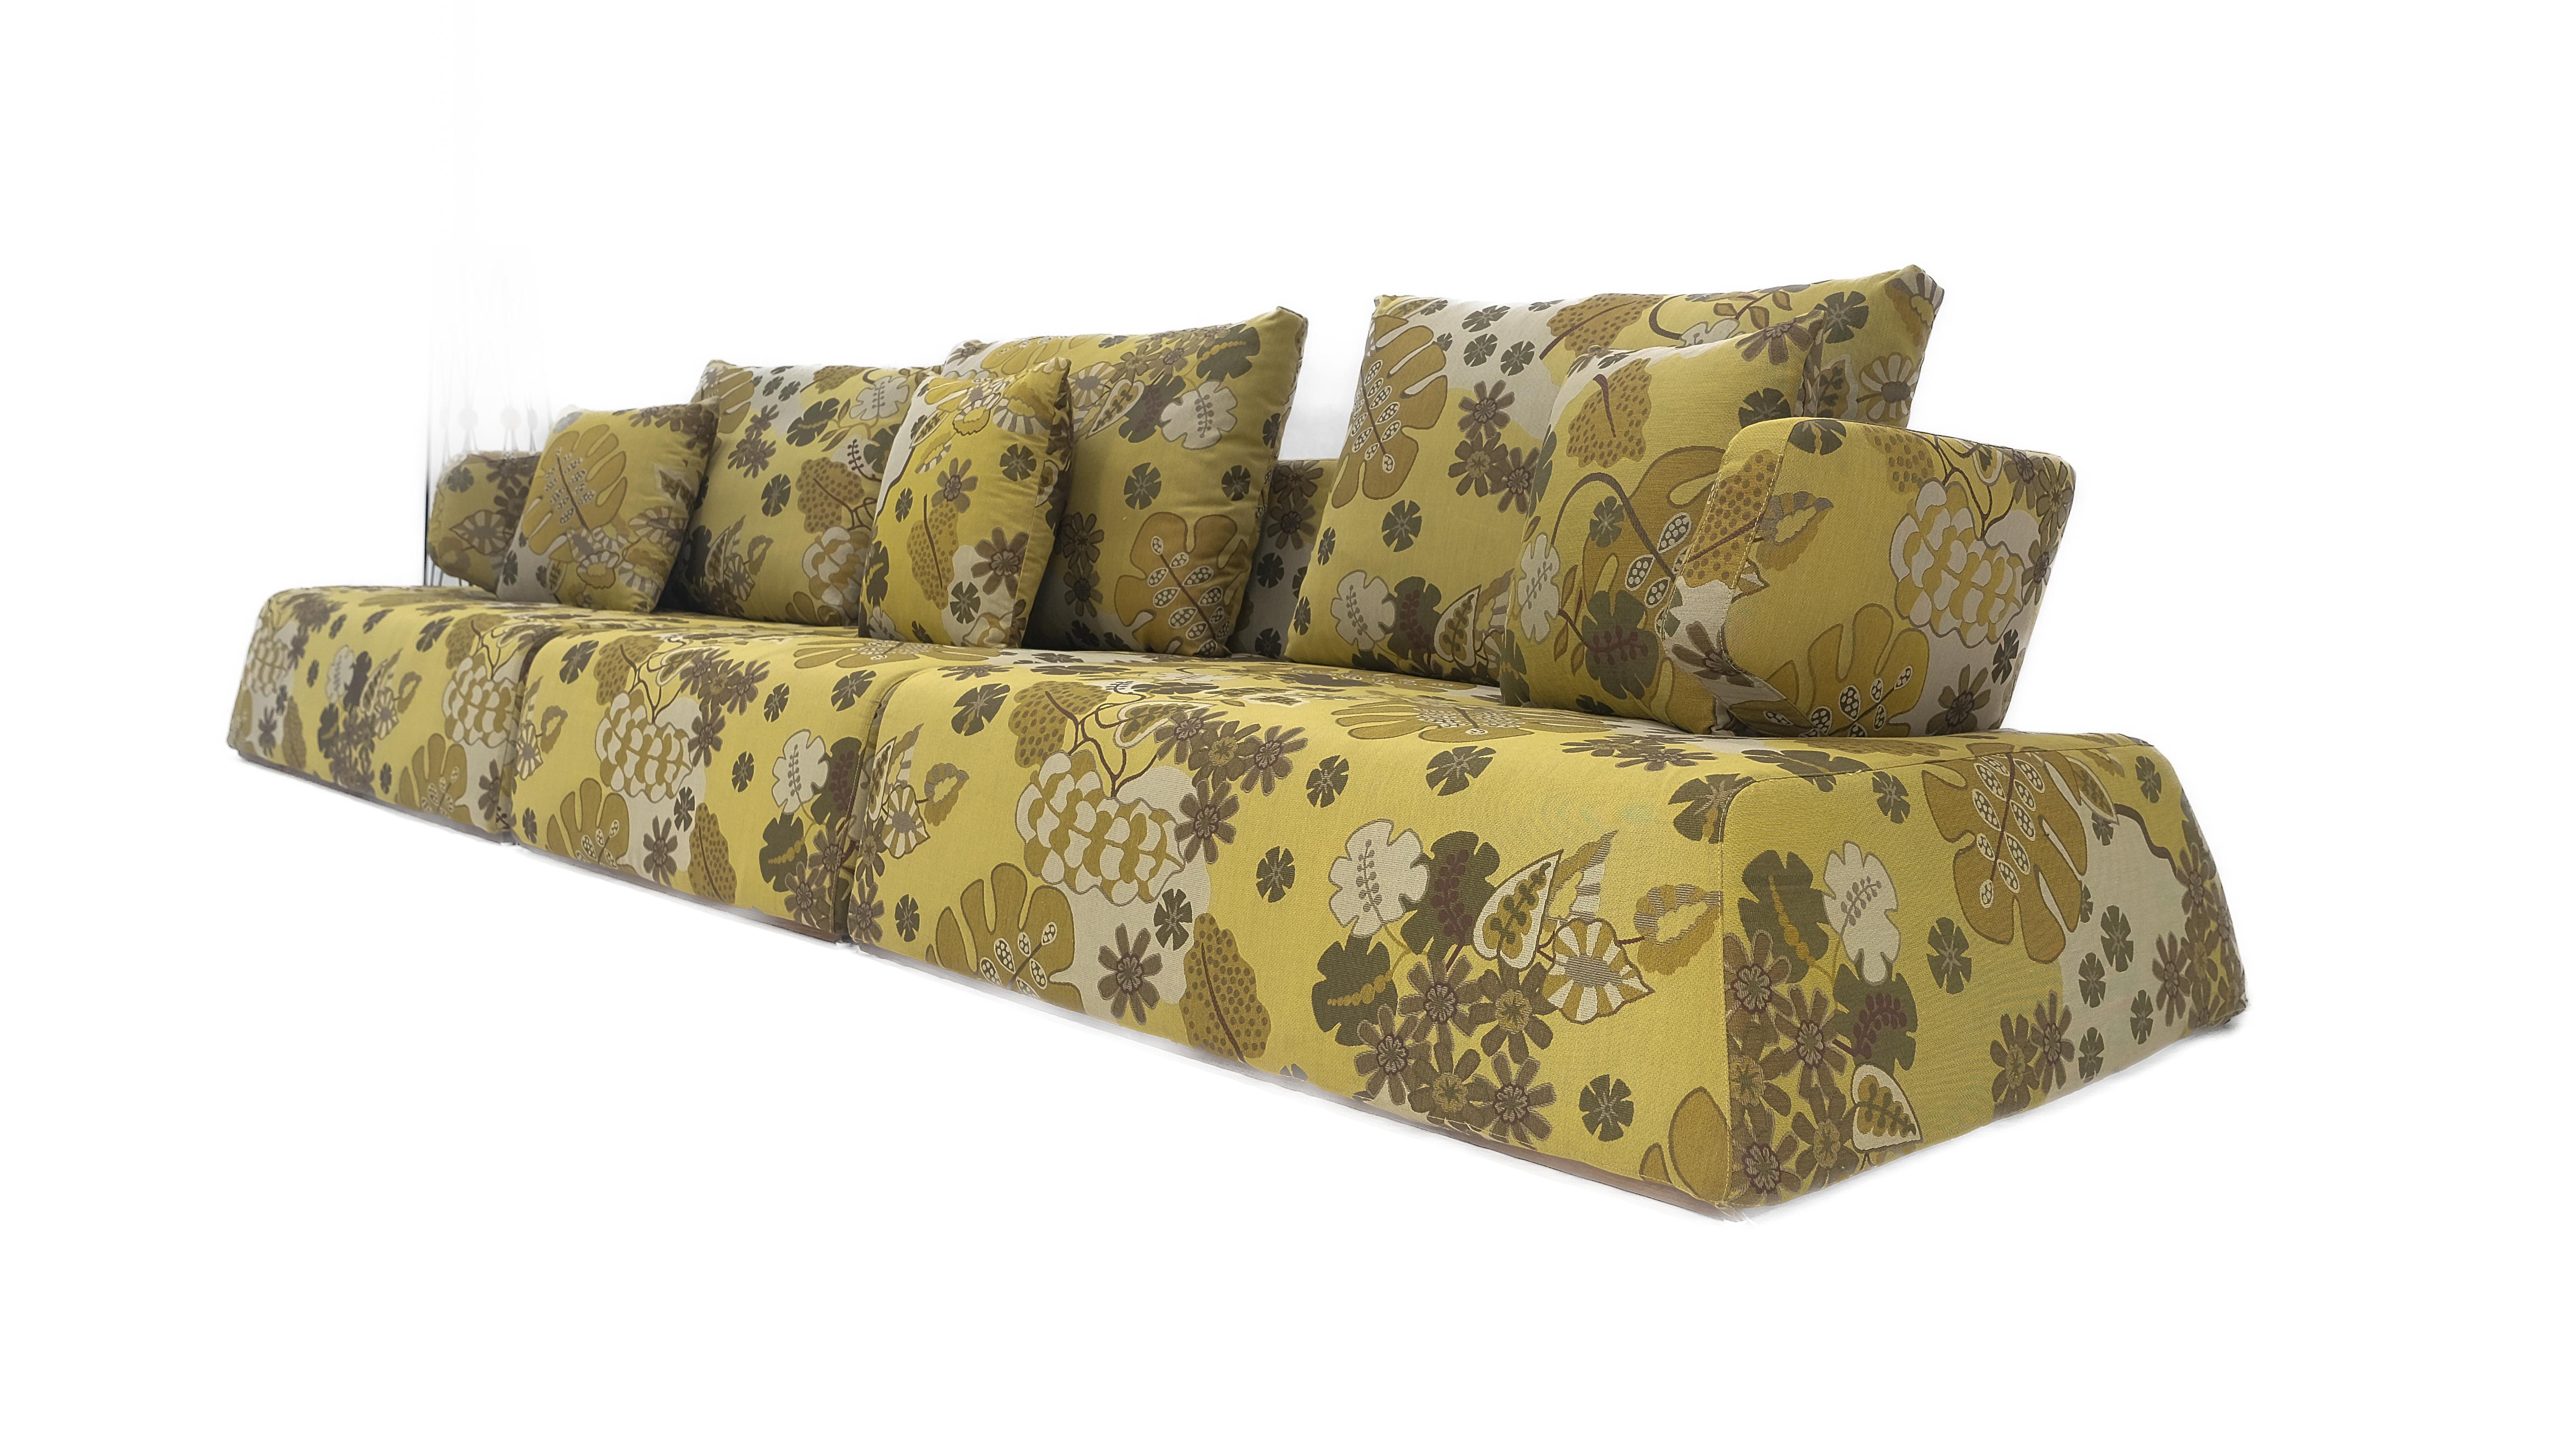 Contemporary Mid Century Modern Green Floral Pattern Upholstery Low Sitter Sofa on Platform  For Sale